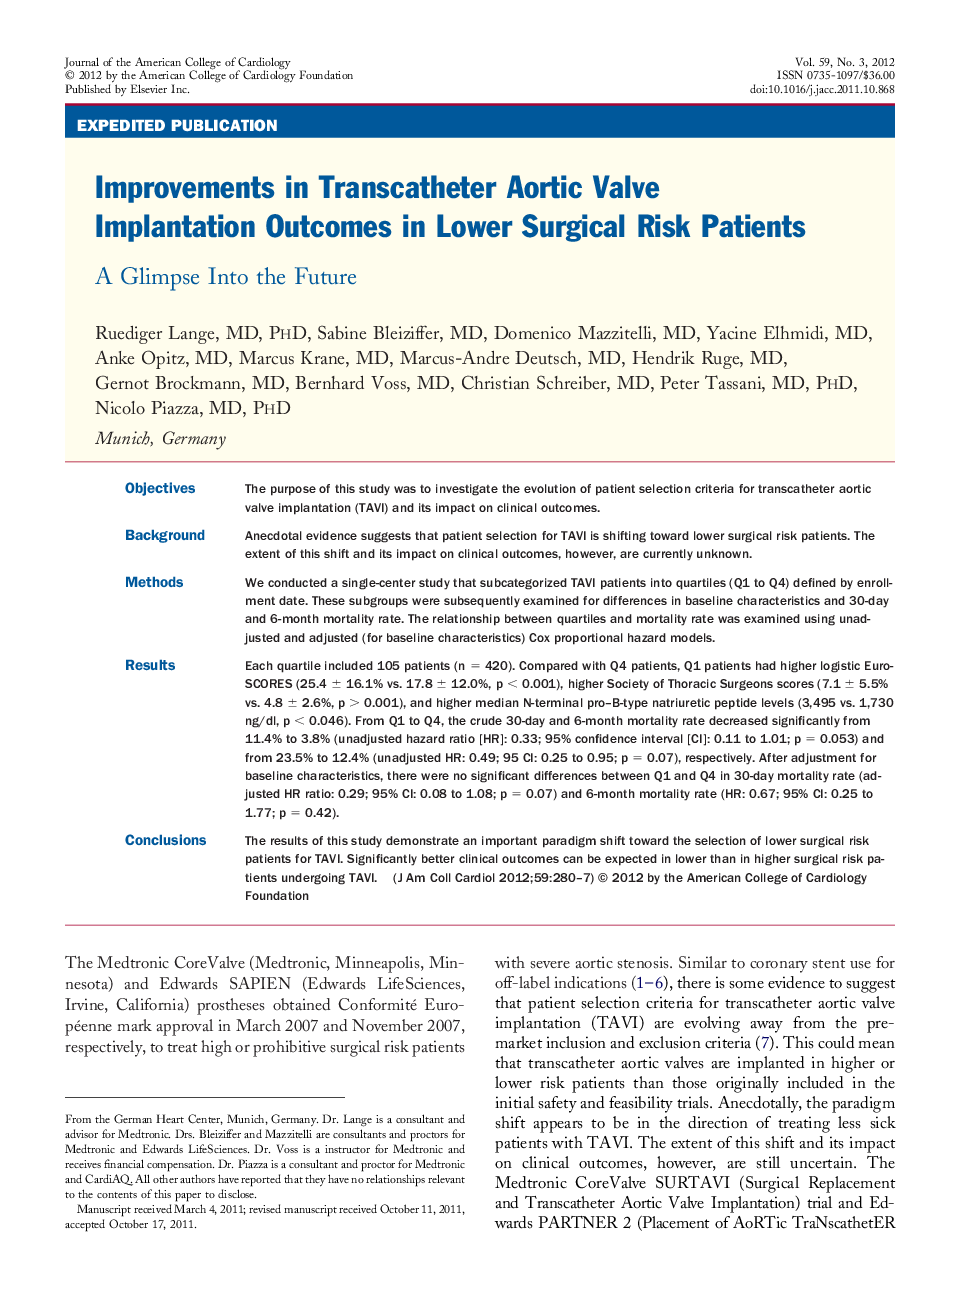 Improvements in Transcatheter Aortic Valve Implantation Outcomes in Lower Surgical Risk Patients : A Glimpse Into the Future